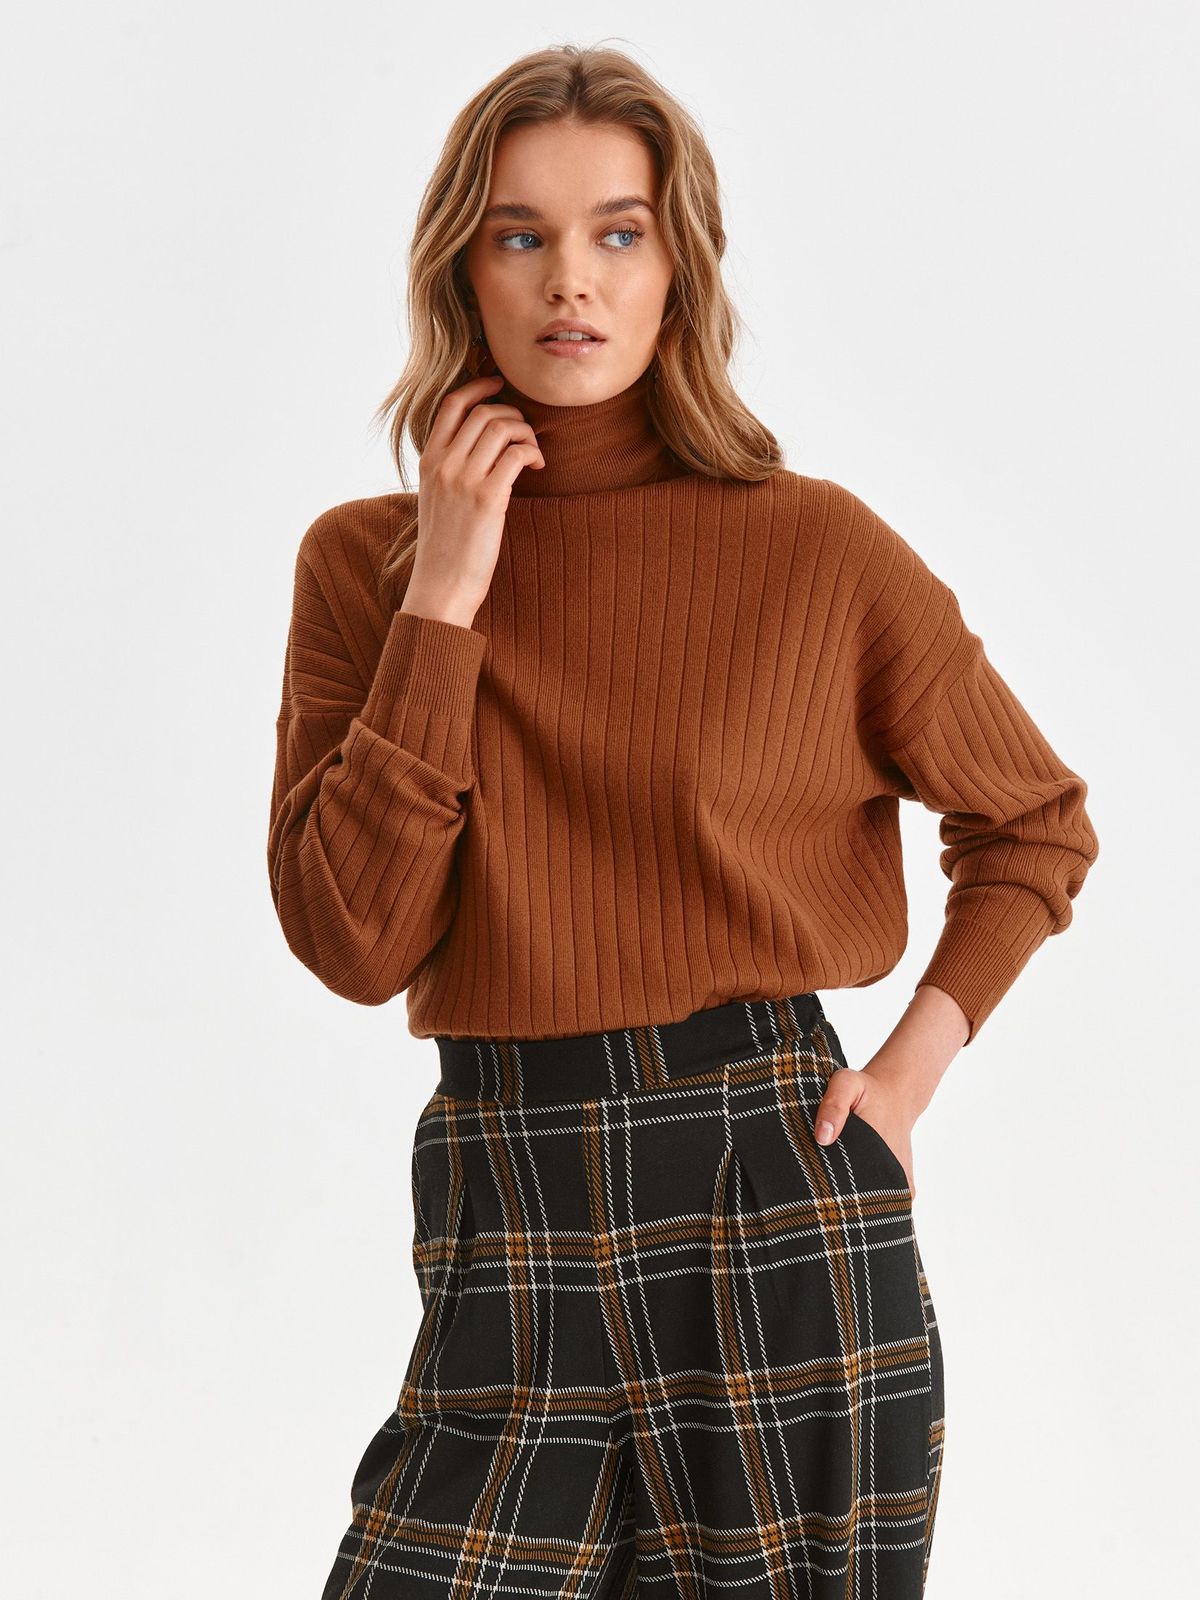 Brown sweater knitted with turtle neck from striped fabric